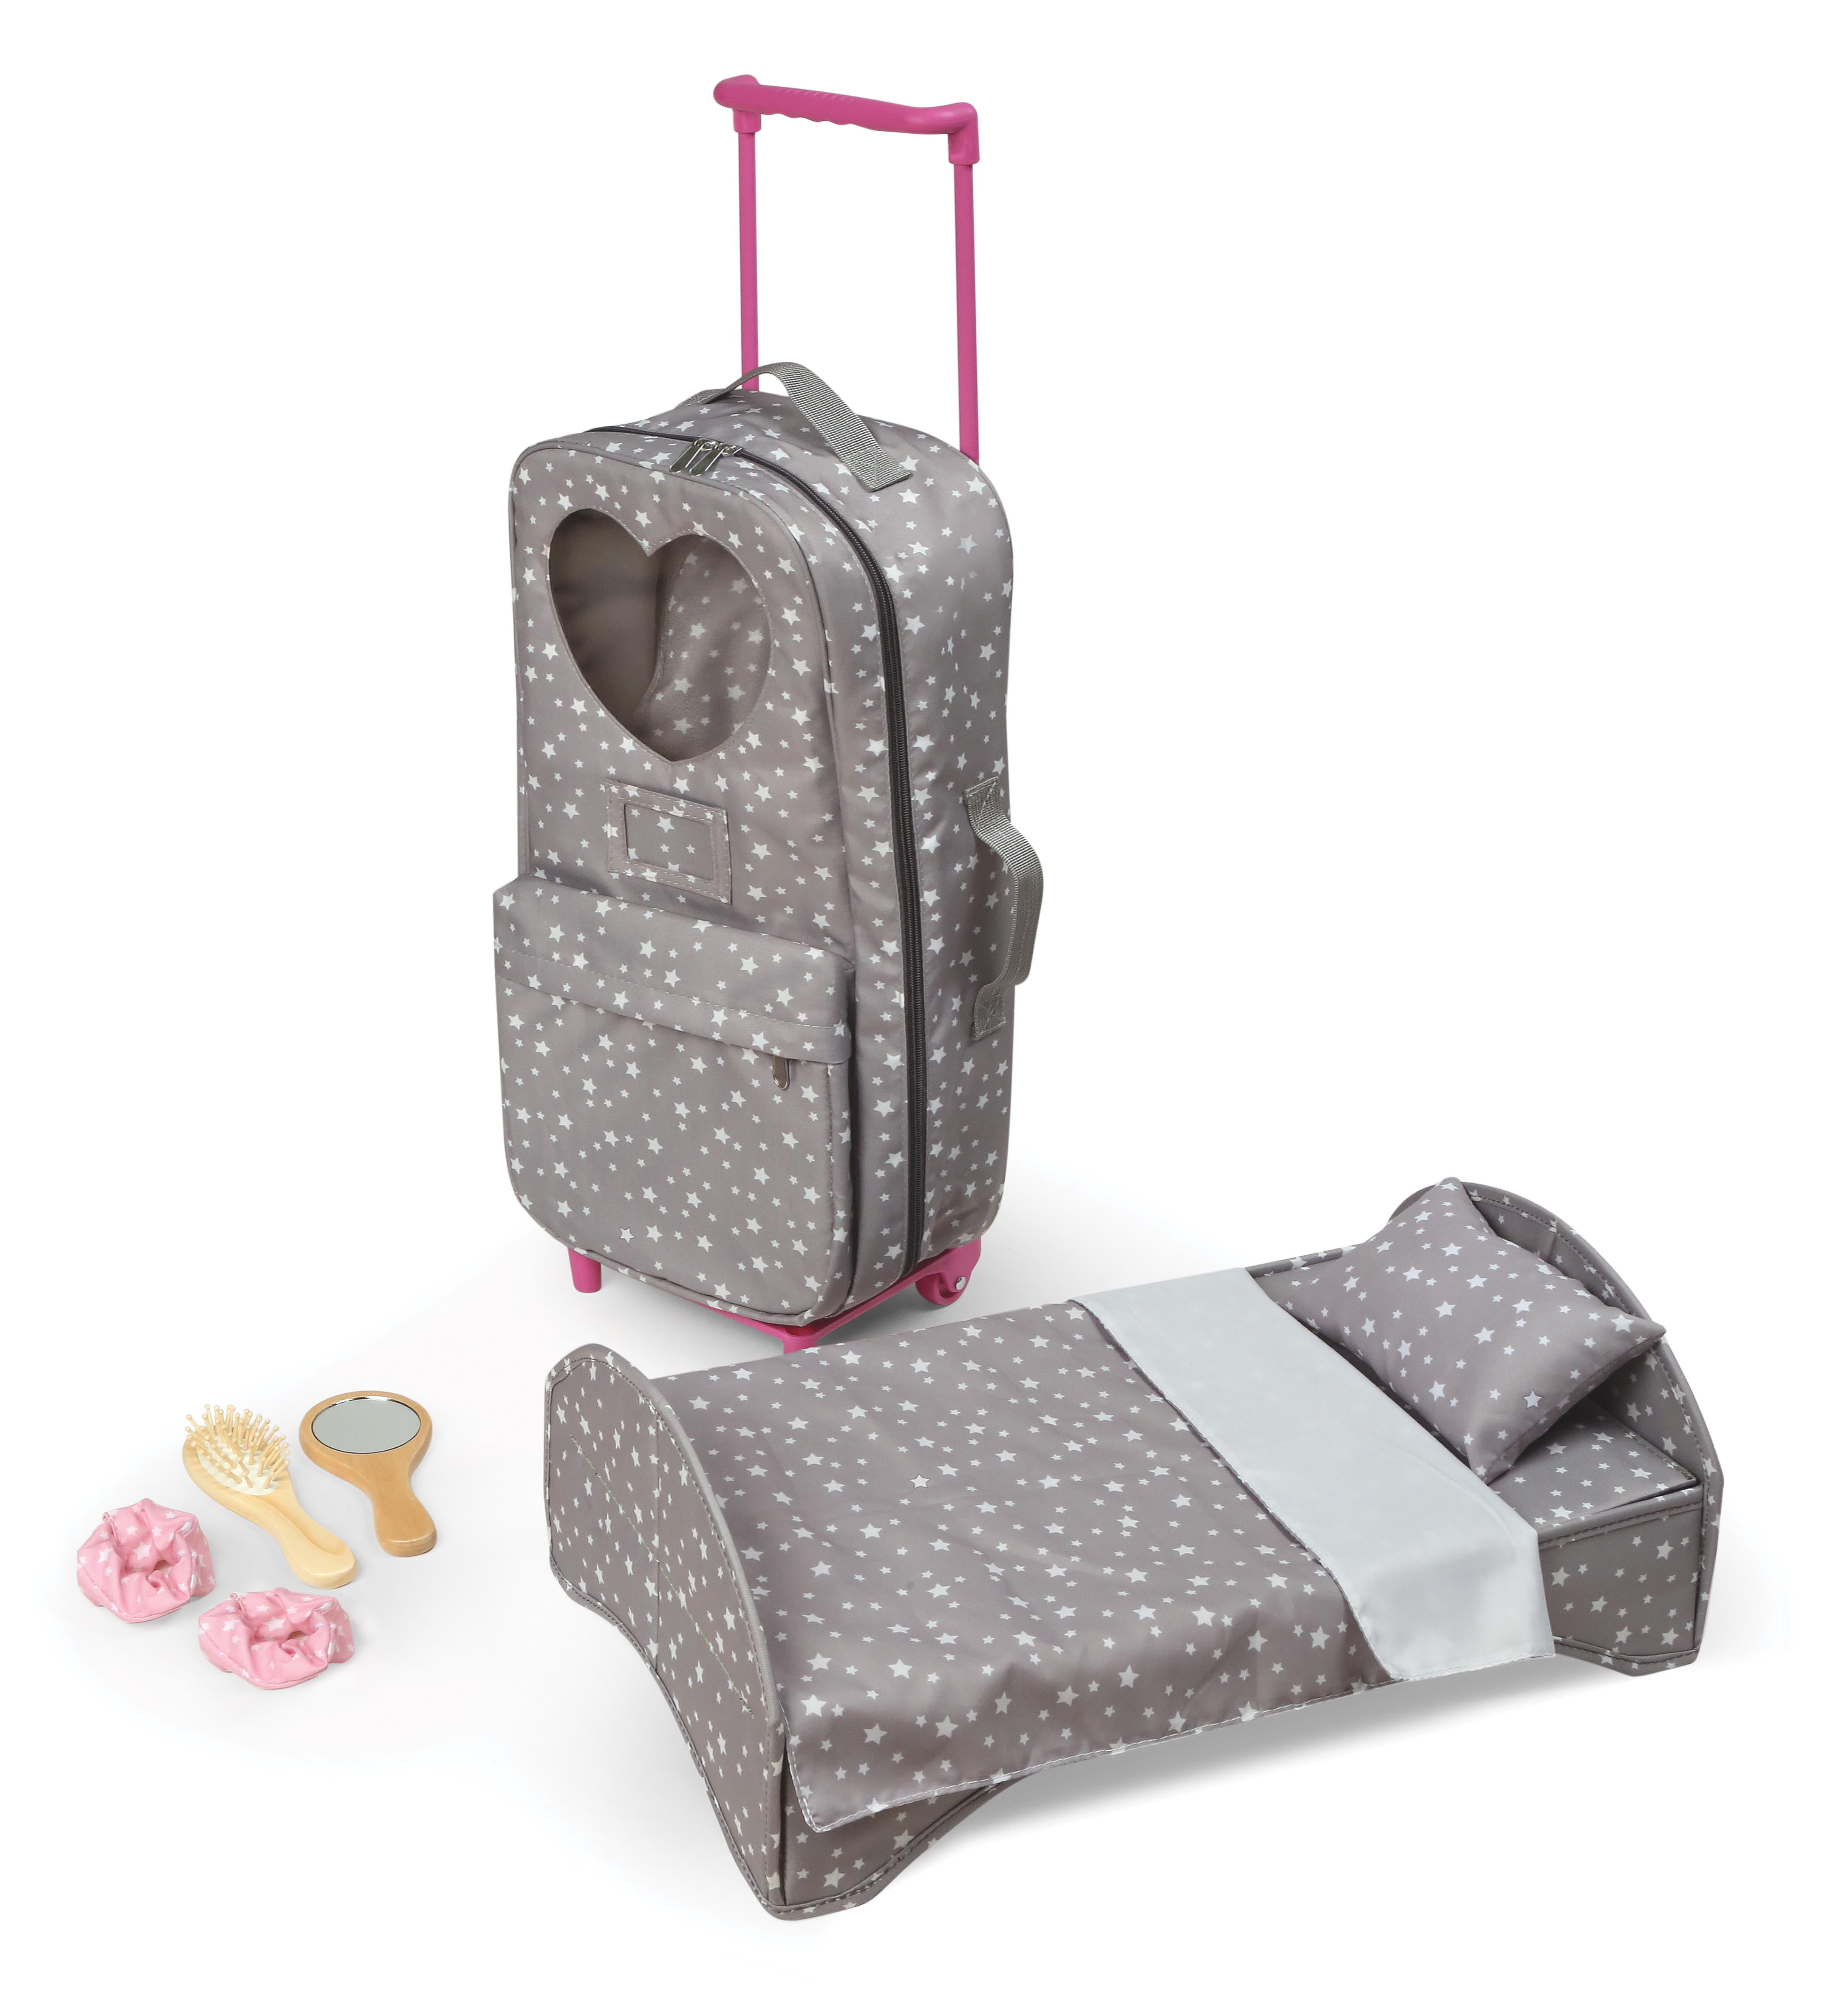 Badger Basket Travel And Tour Trolley Carrier With Bed for 18-Inch Dolls -  Gray/Stars - Fits American Girl, My Life As & Most 18 inch Dolls